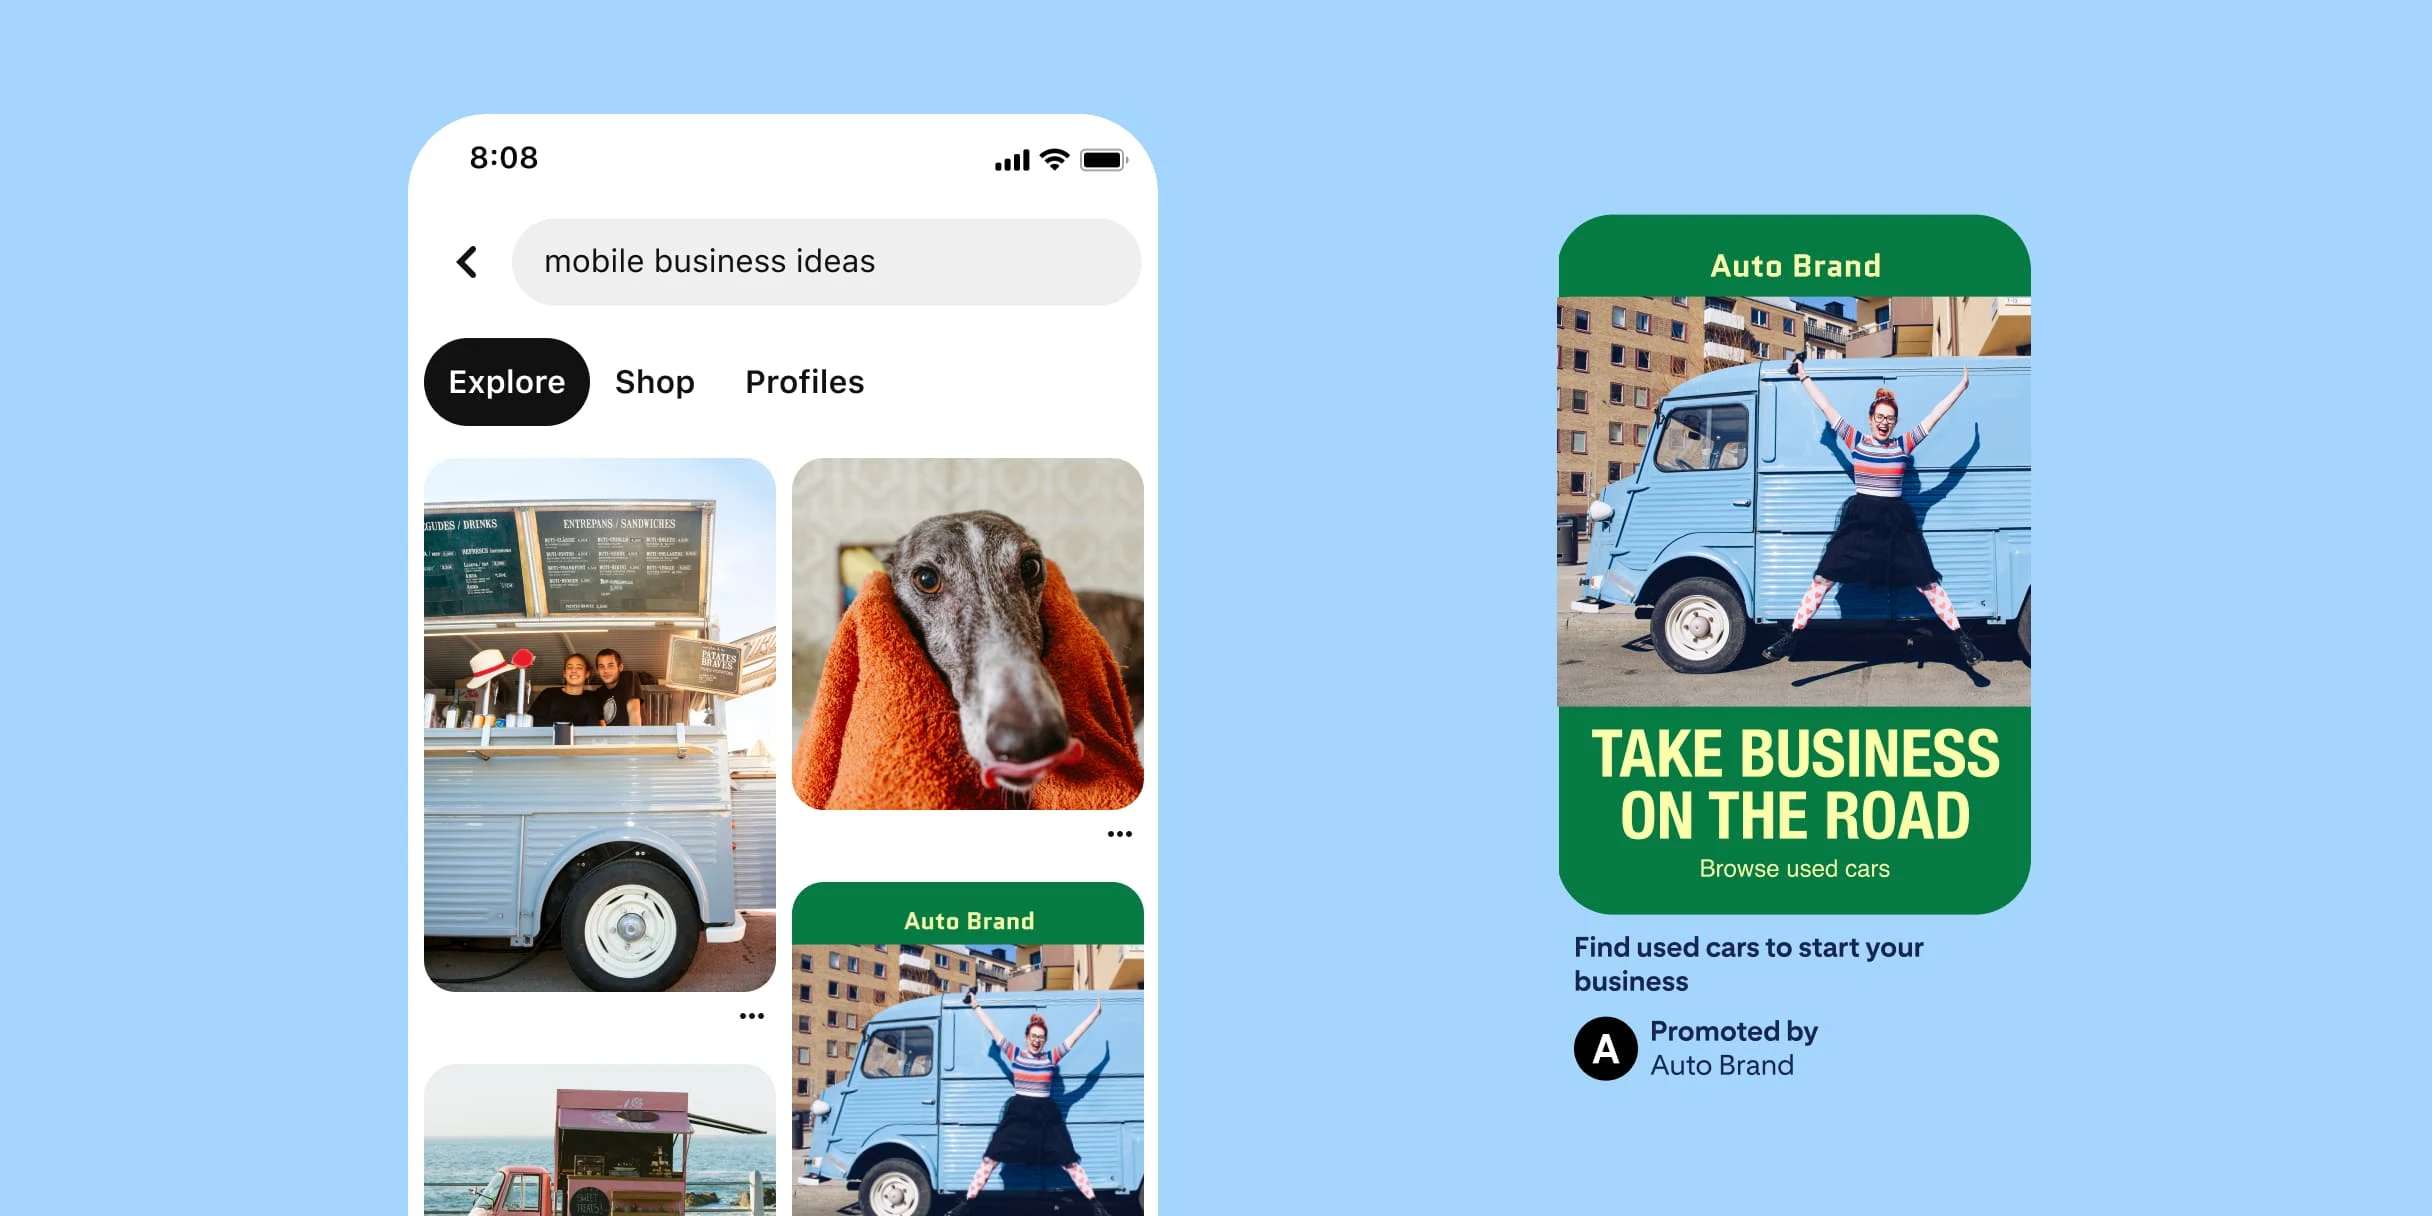 Pinterest search term result for ‘mobile business ideas’. A couple looking out over the counter in their food van. A greyhound is being dried with an orange towel. A pink mobile food cart selling pastries. A Pin featuring a white woman jumping in front of a light blue vintage van. The text reads, ‘Take business on the road – Browse used cars’. The description underneath reads, ‘Find used cars to start your business’. 